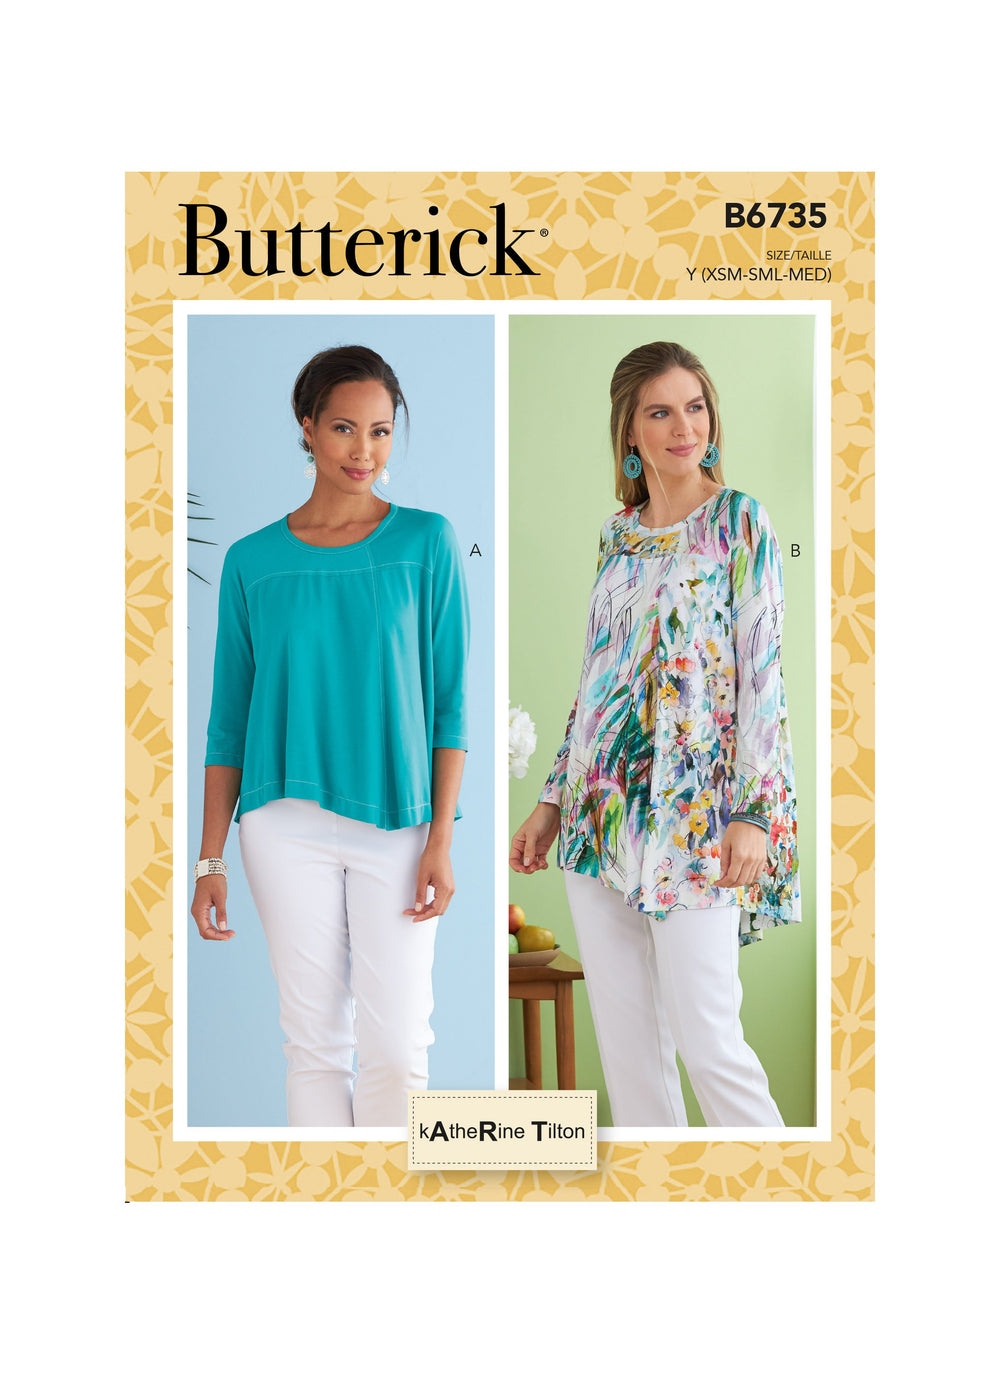 Butterick Sewing Pattern 6735 Misses' Top from Jaycotts Sewing Supplies